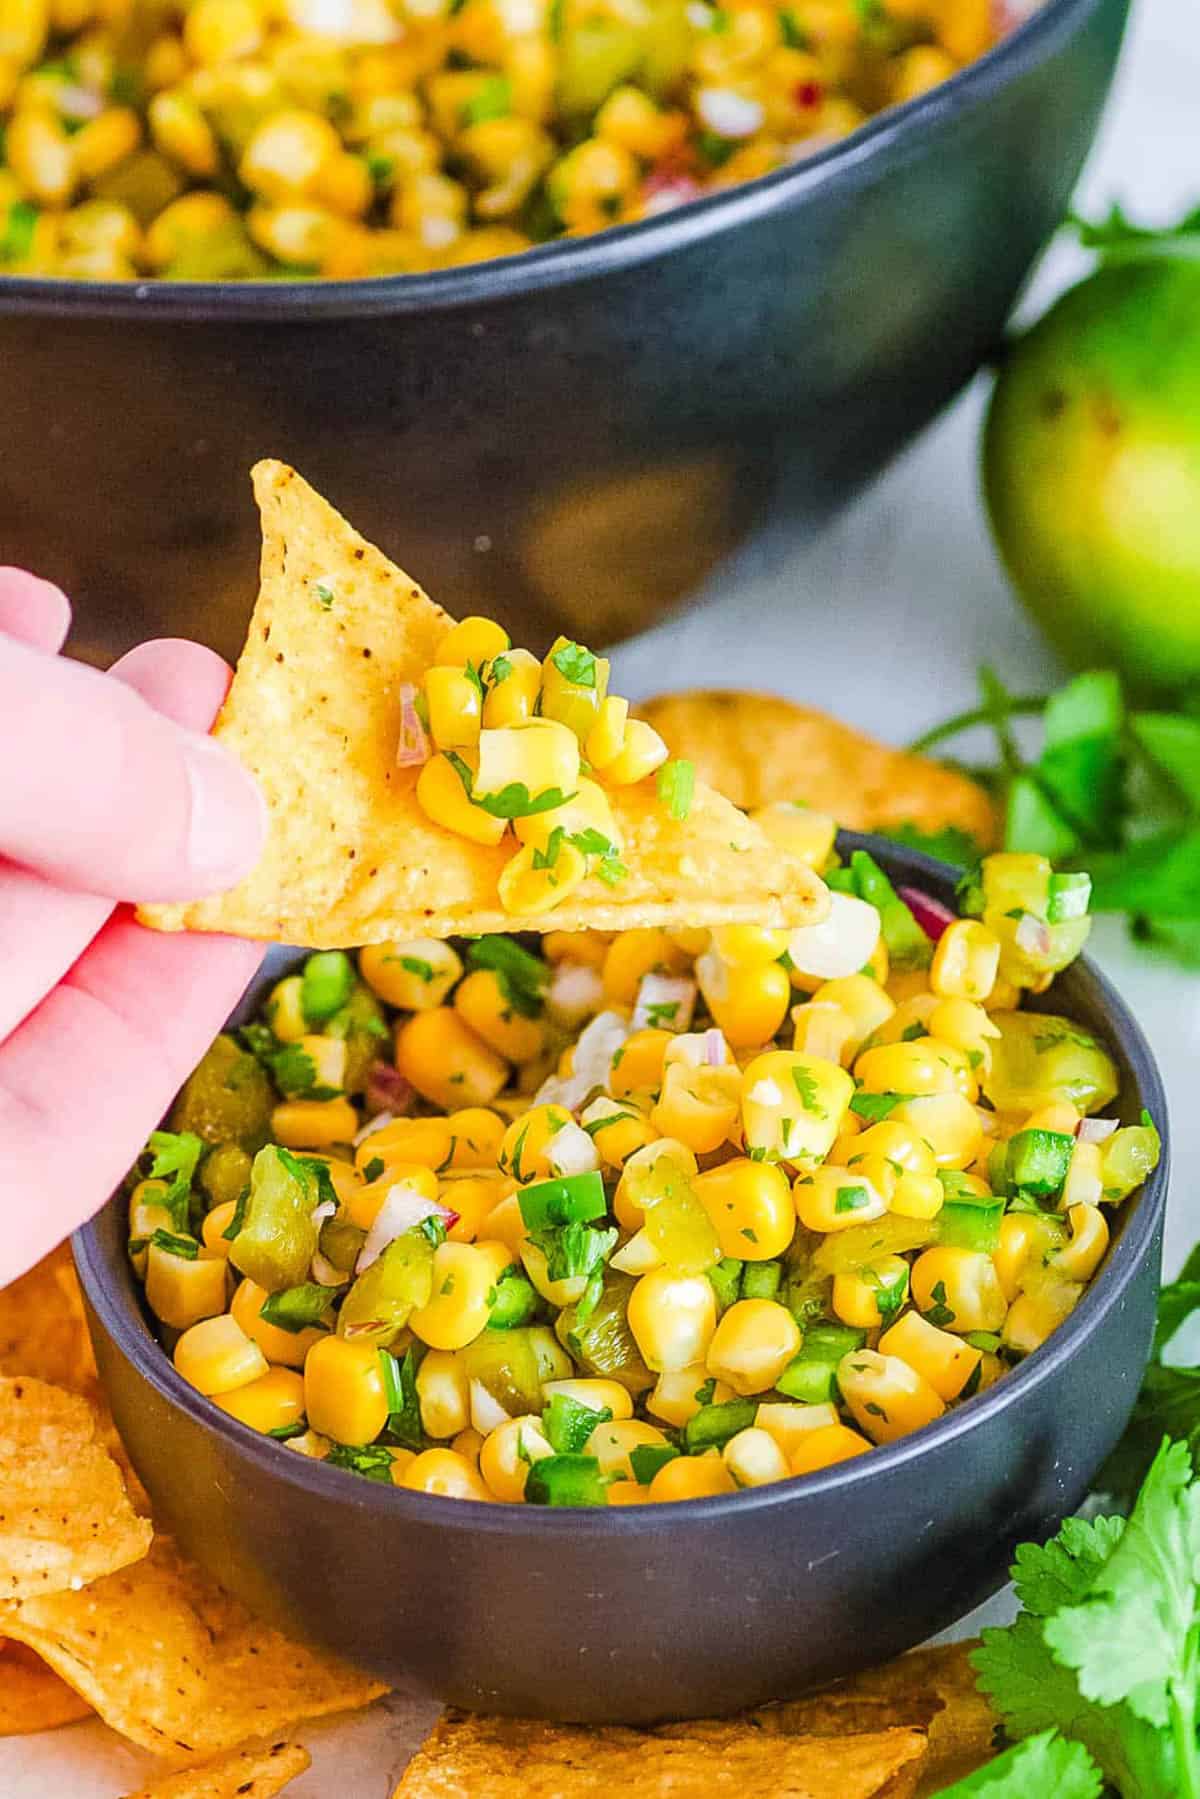 Chipotle corn salsa copycat recipe served in a black bowl with a tortilla chip as a garnish.